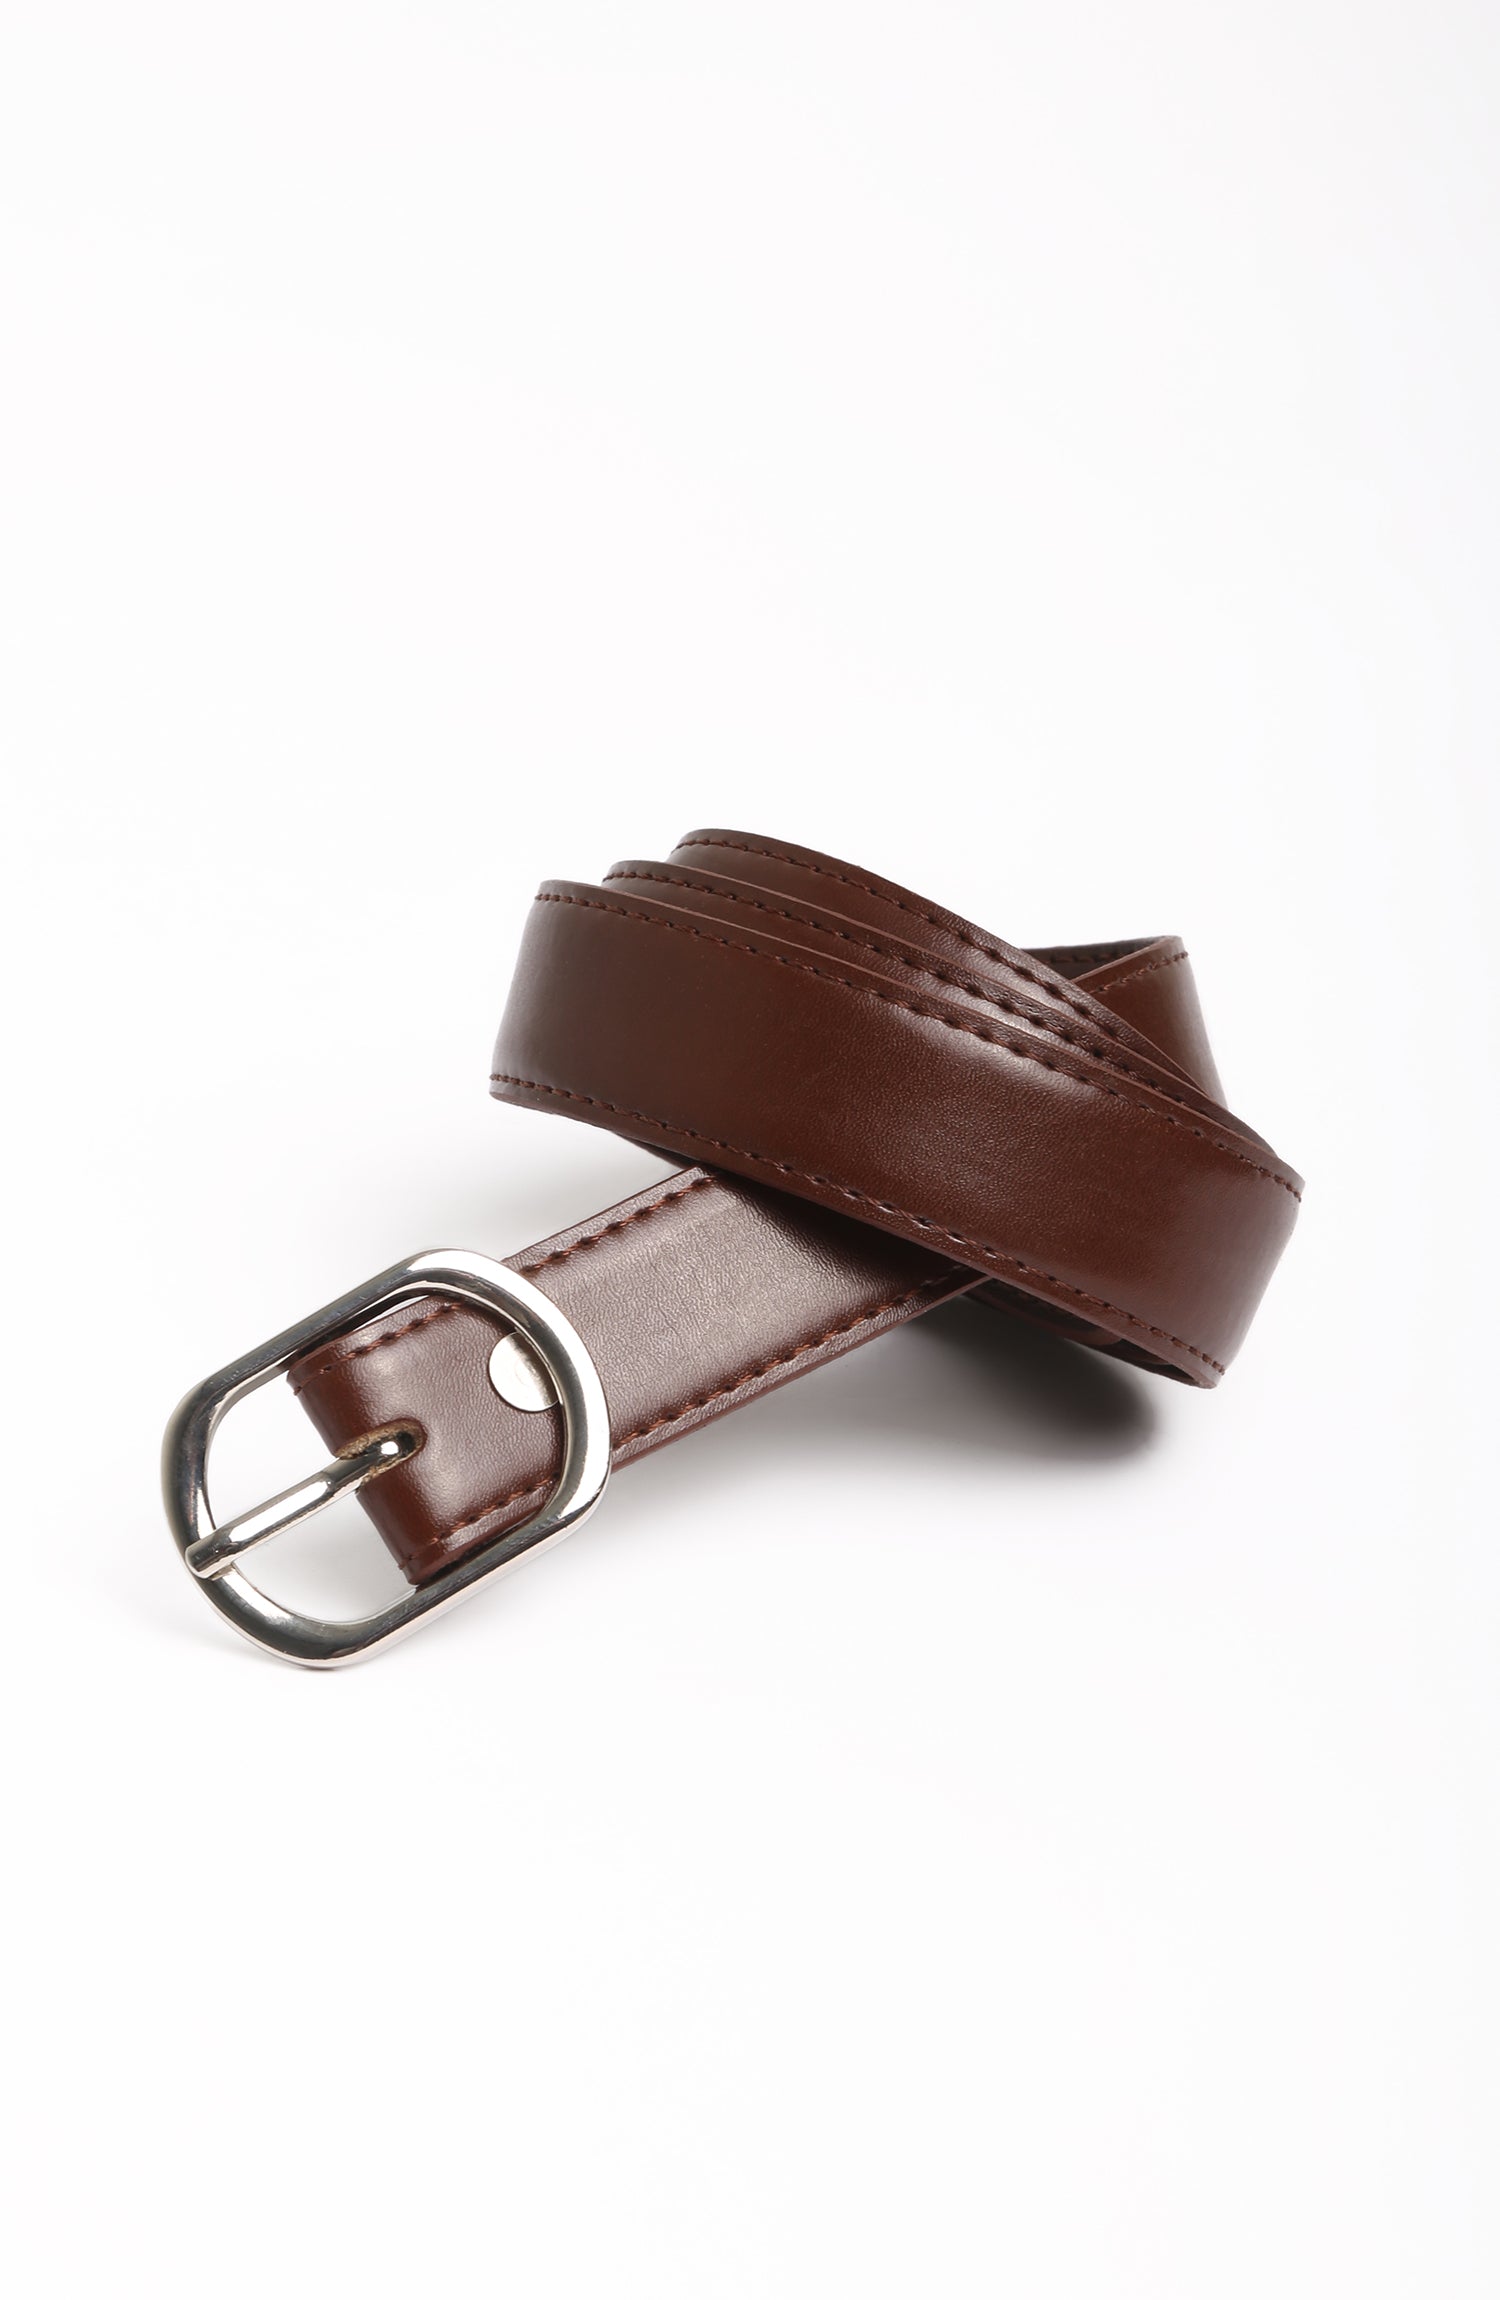 WBL701122-LEATHER BELT-BROWN – Leisure Club Official